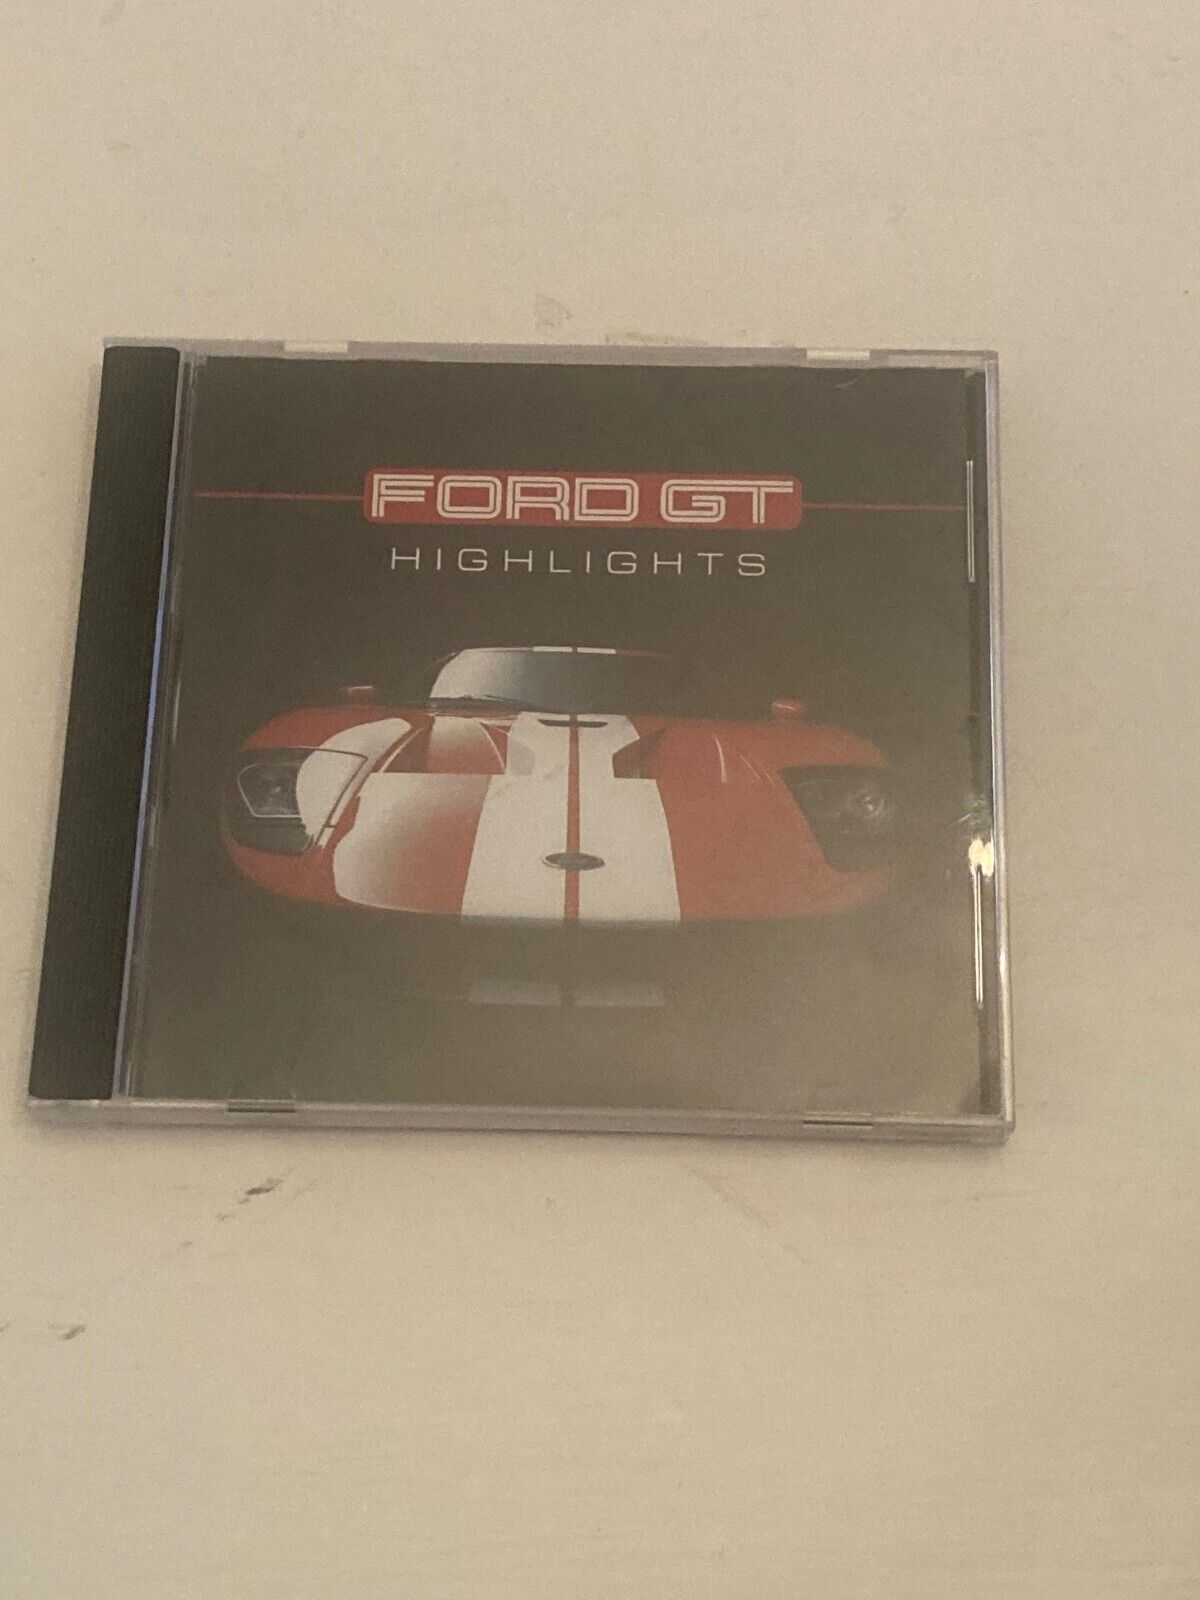 2005 Ford GT Product Launch Dealership Training DVD SUPER RARE Pre-Release